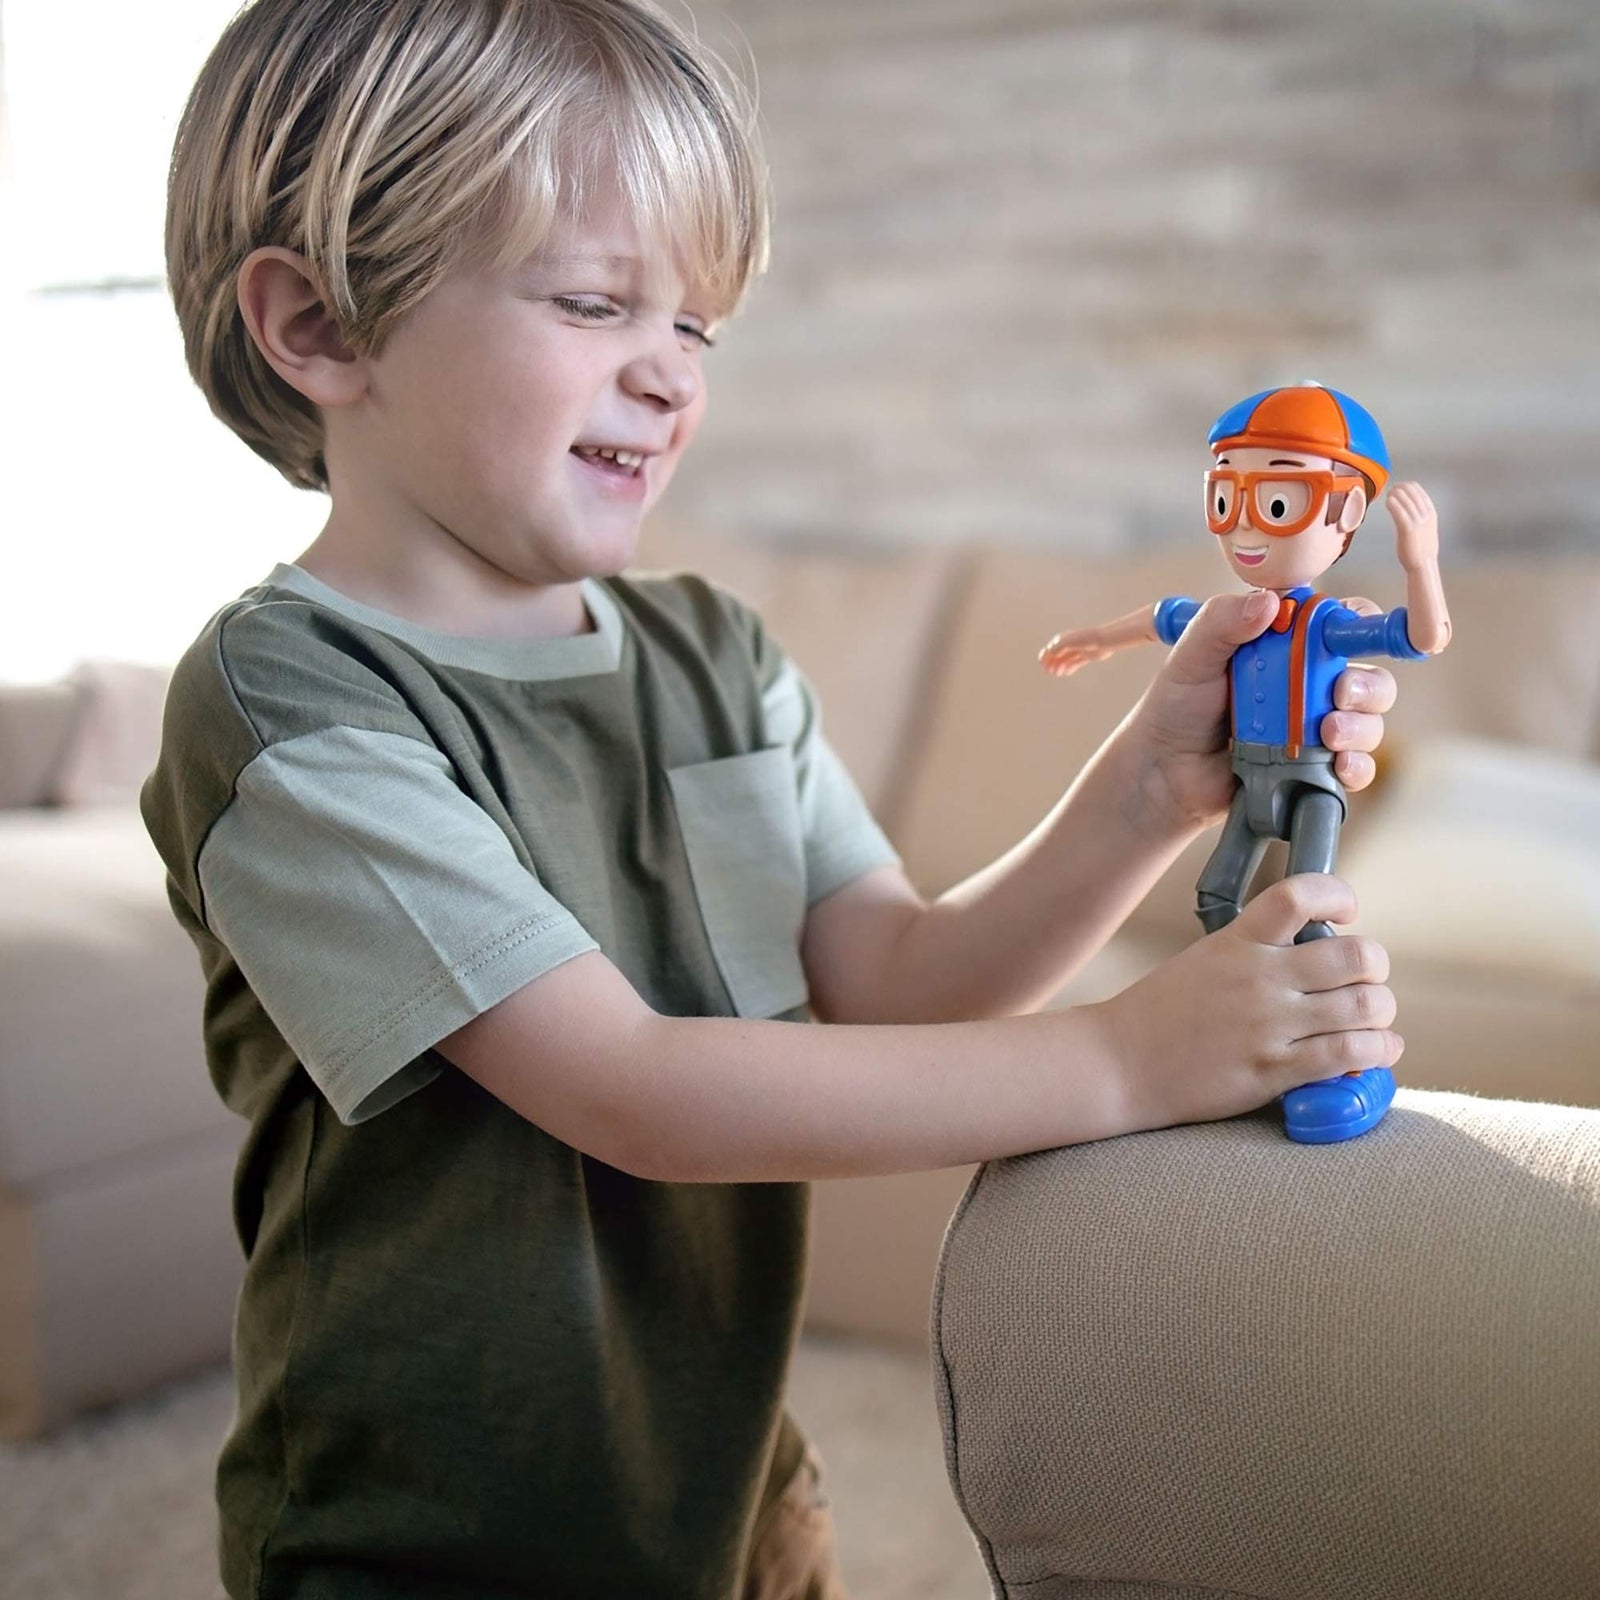 Blippi Talking Figure, 9-inch Articulated Toy with 8 Sounds and Phrases, Poseable Figure Inspired by Popular YouTube Edutainer